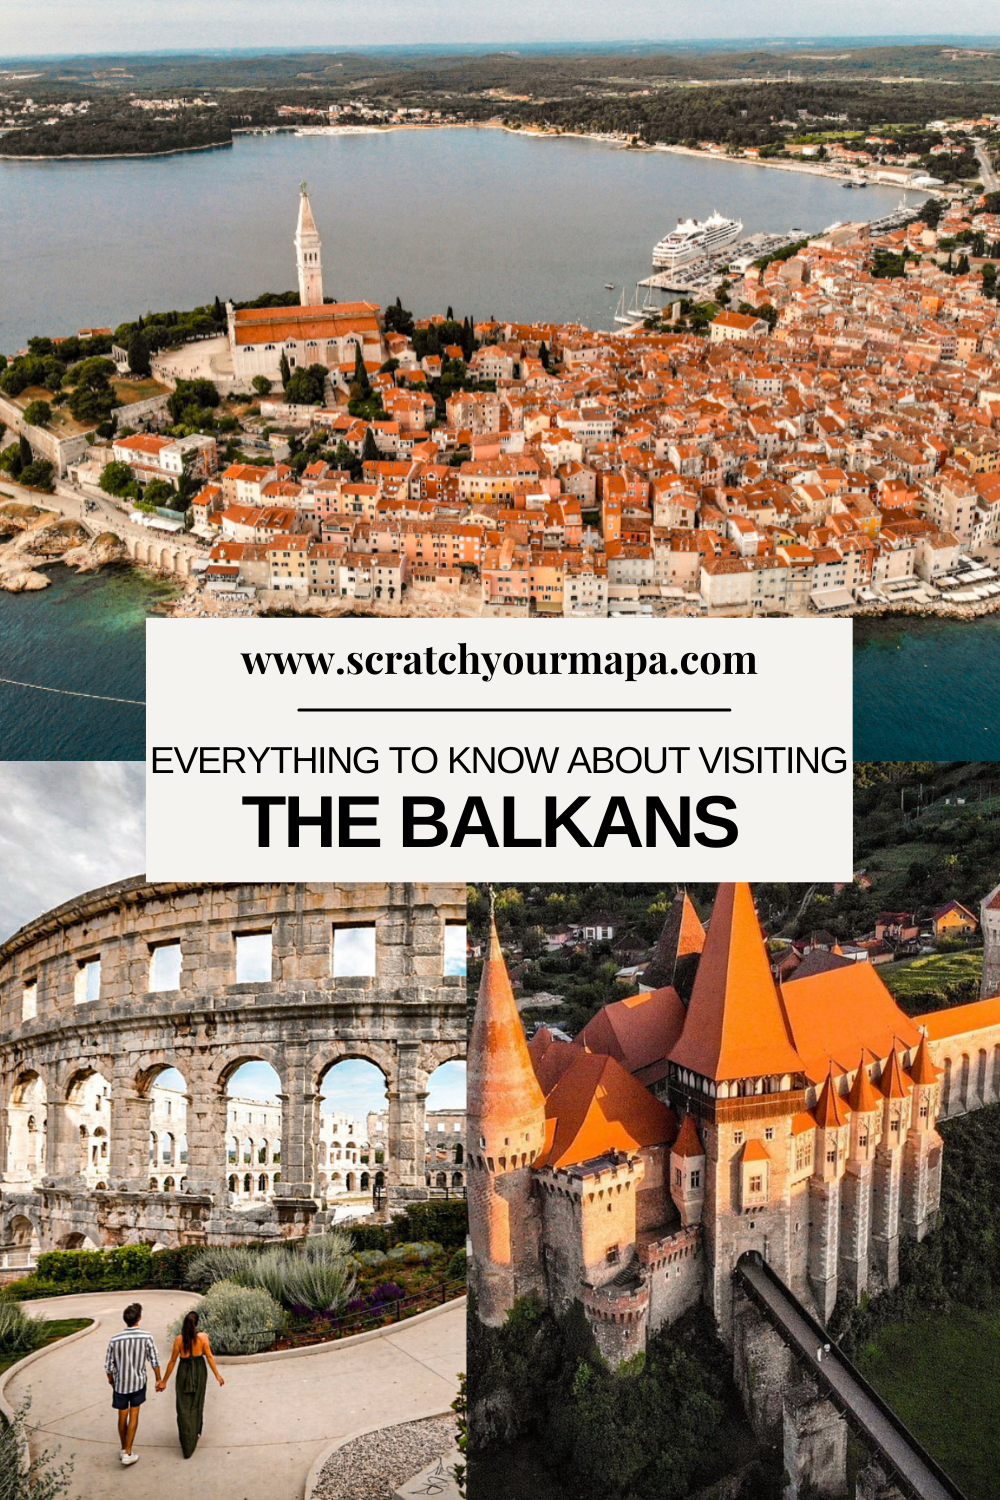 What Countries Were the Balkans pin